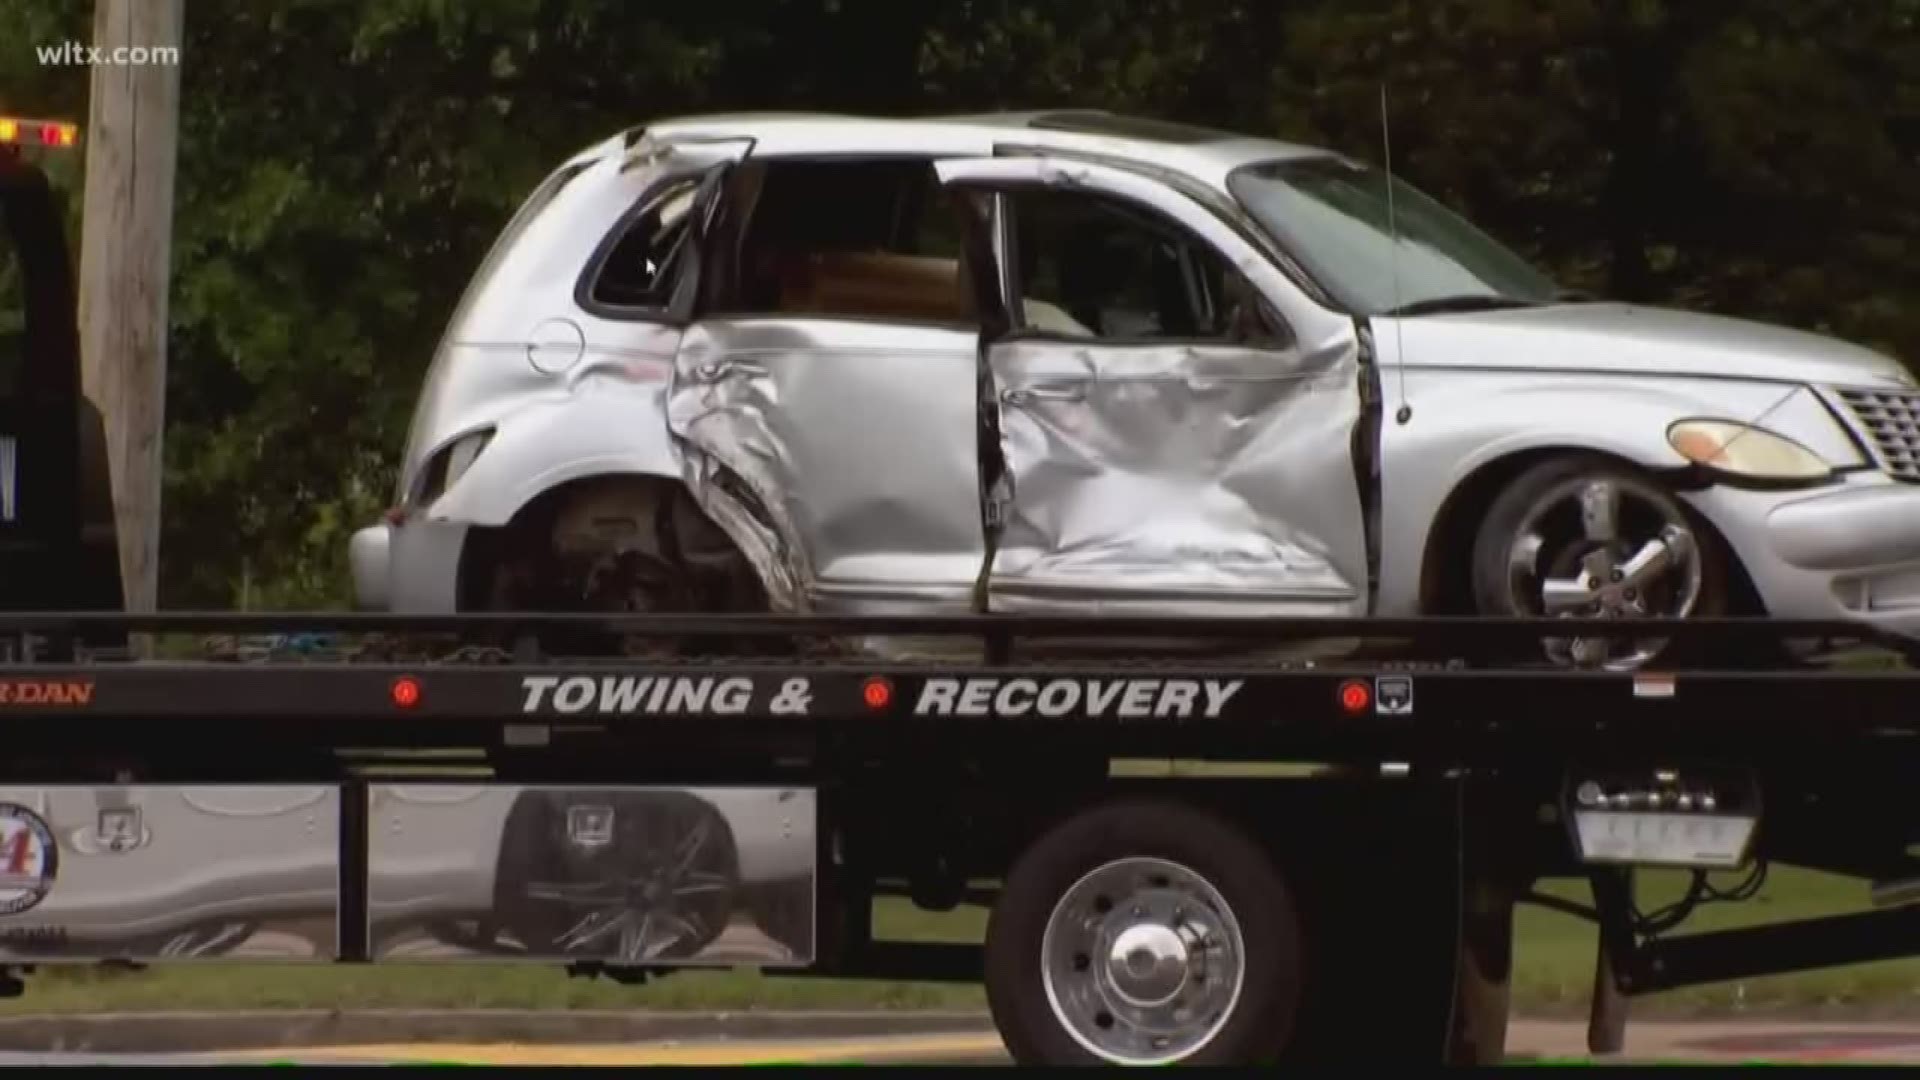 Authorities say they think road rage between two cars on a South Carolina highway led to a 13-year-old boy being struck by a car as he walked his little sister to th